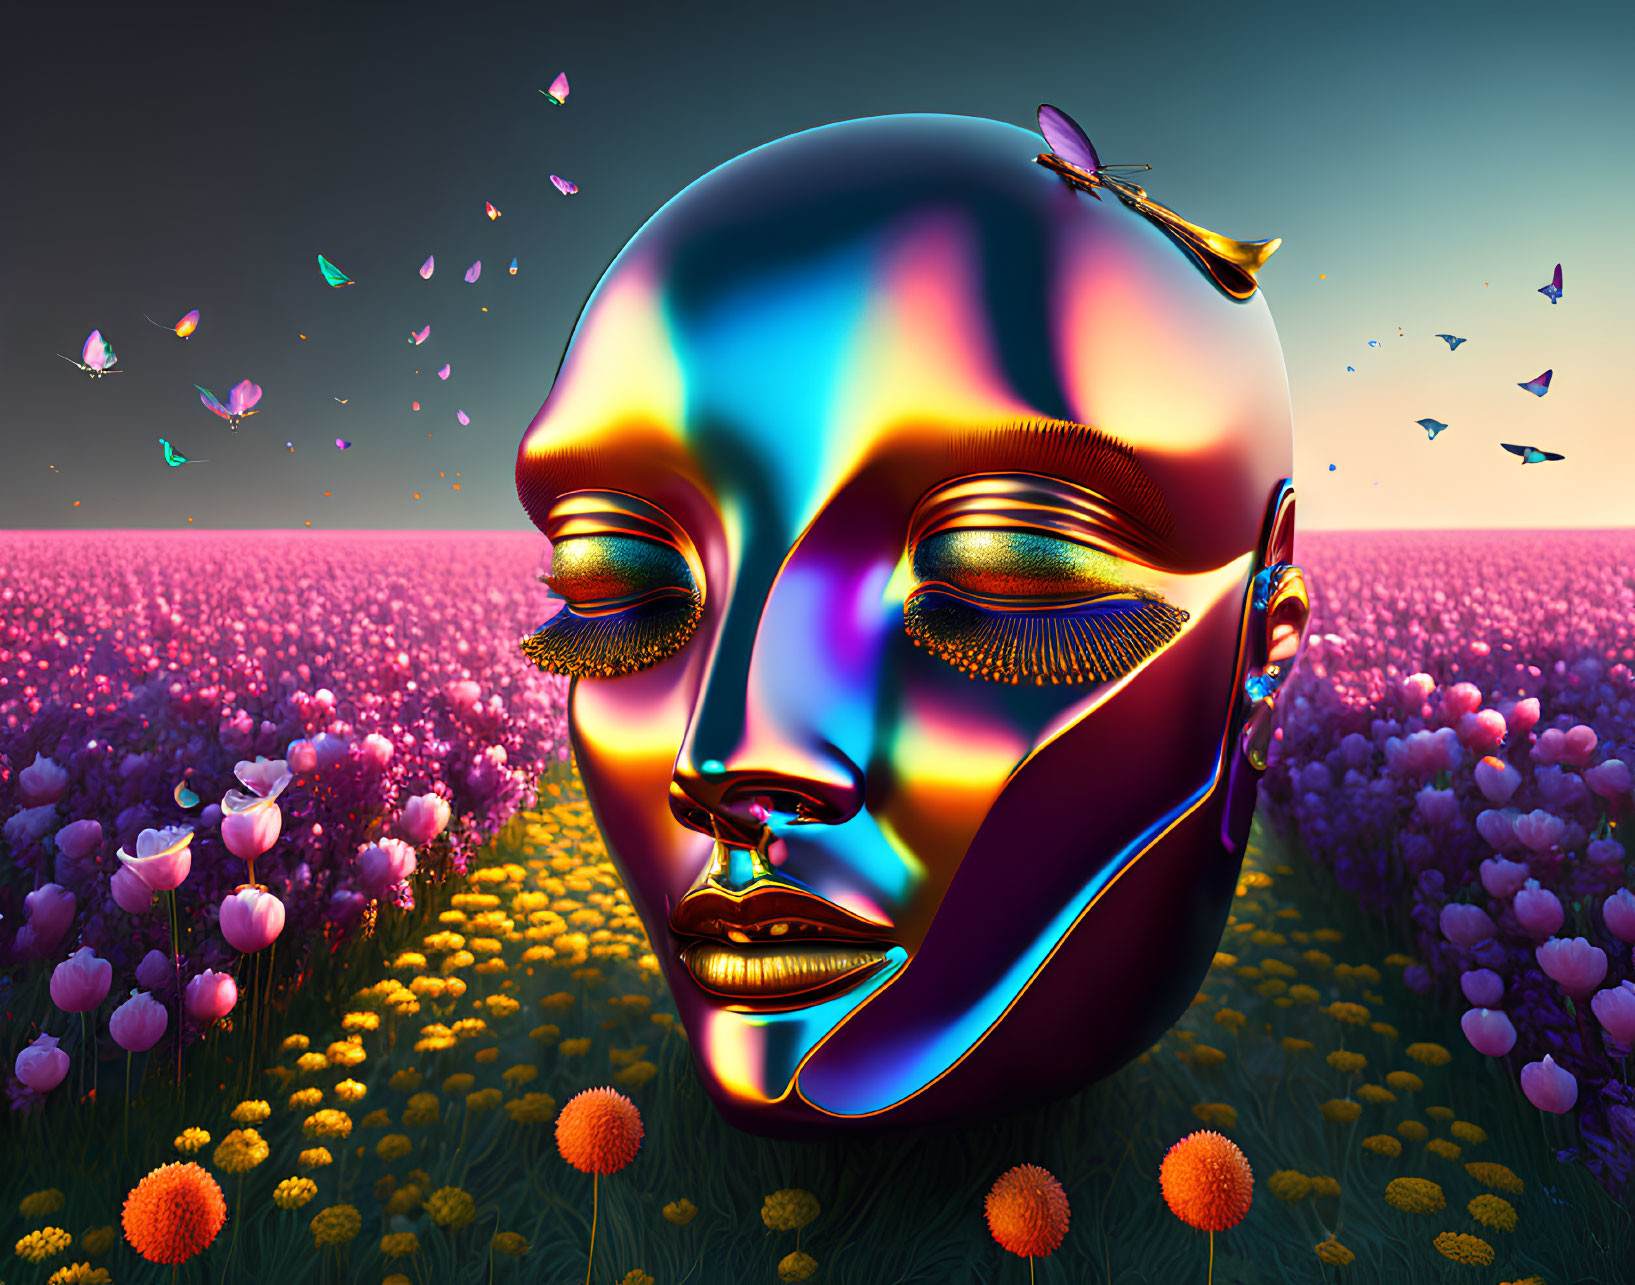 Colorful digital artwork: Metallic face in a nature scene with butterflies and dragonfly under pink and blue